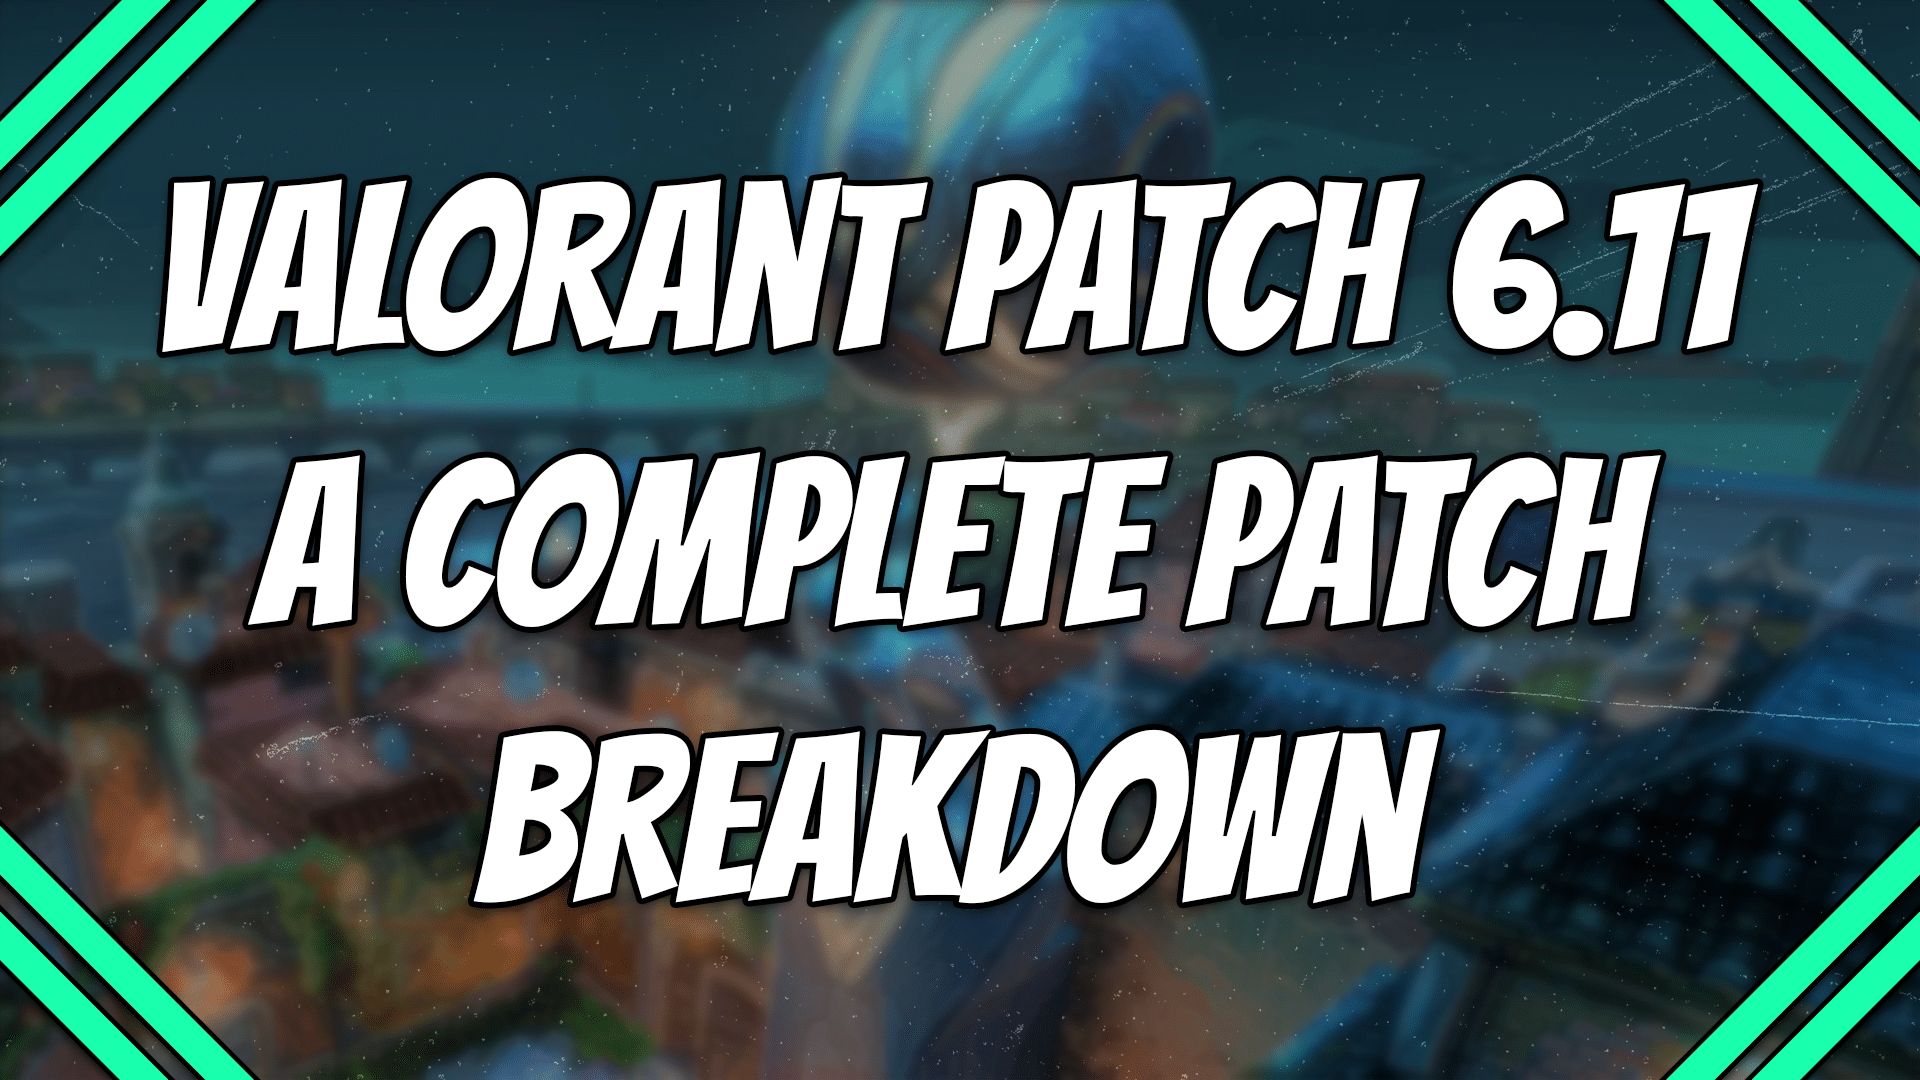 Huge Changes Coming to Pearl in the Next VALORANT Patch - Valorant